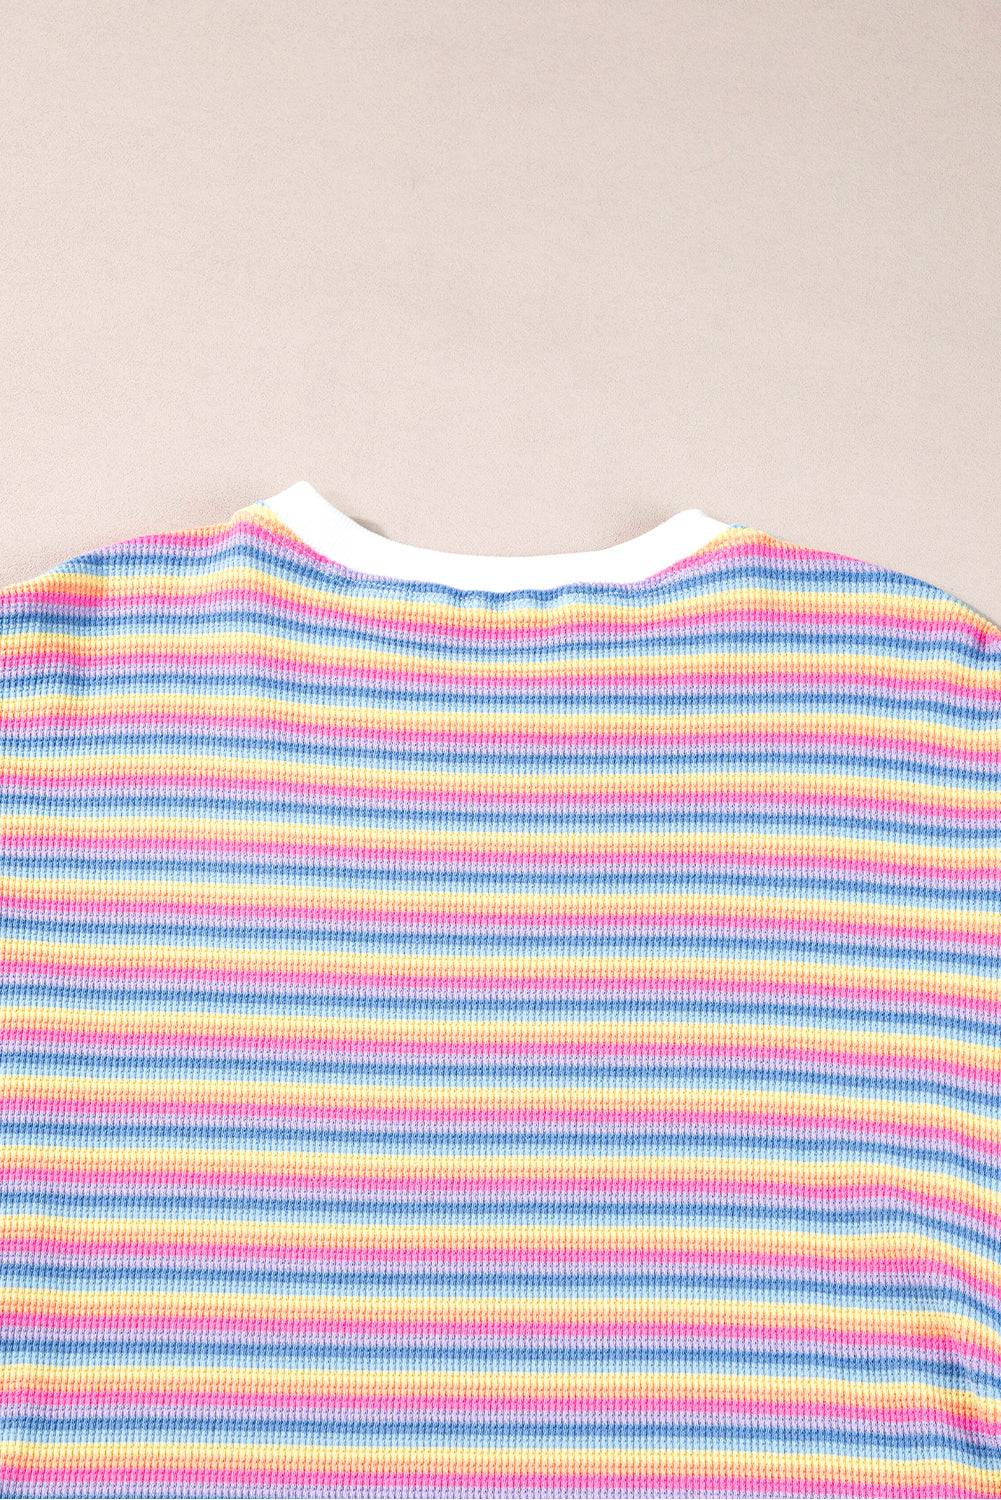 a striped shirt laying on top of a table